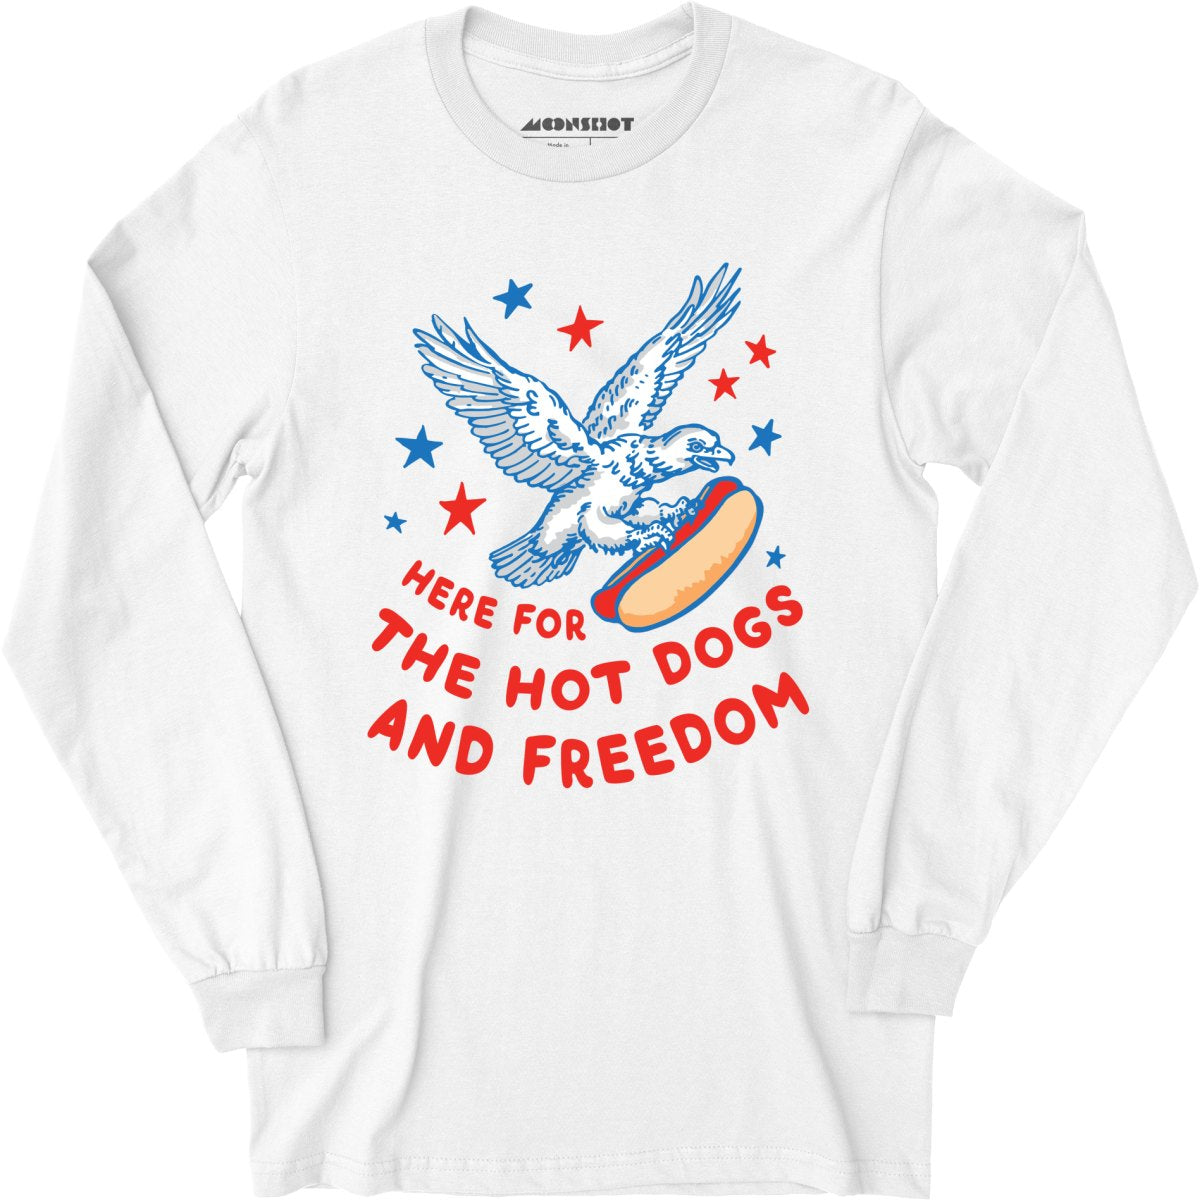 Here For The Hot Dogs and Freedom - Long Sleeve T-Shirt